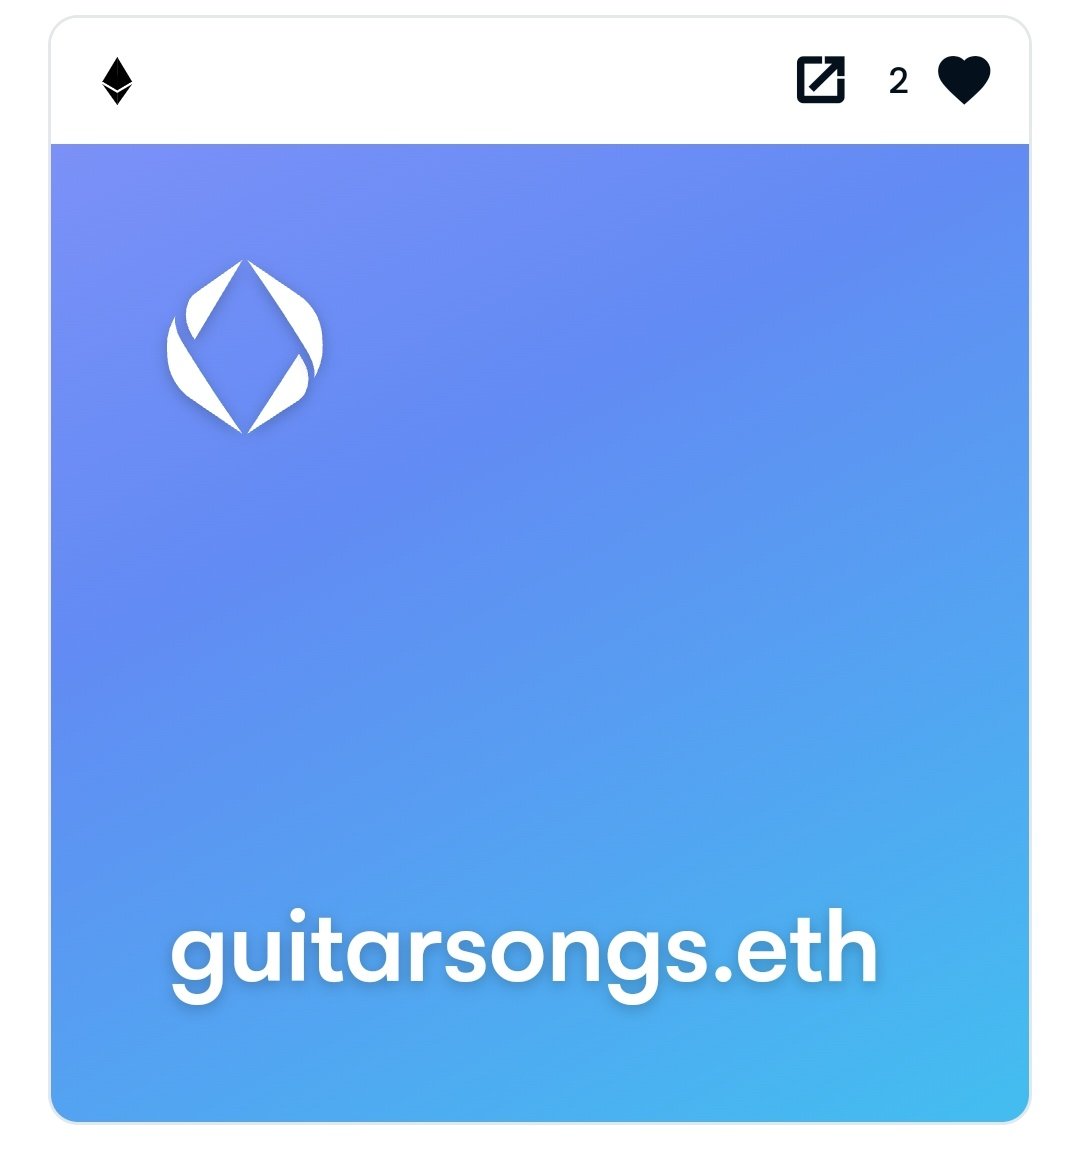 GM go and check out my @opensea
all #ENS reduced
guitarsongs.eth
is a #prepunk one!

shoot offers